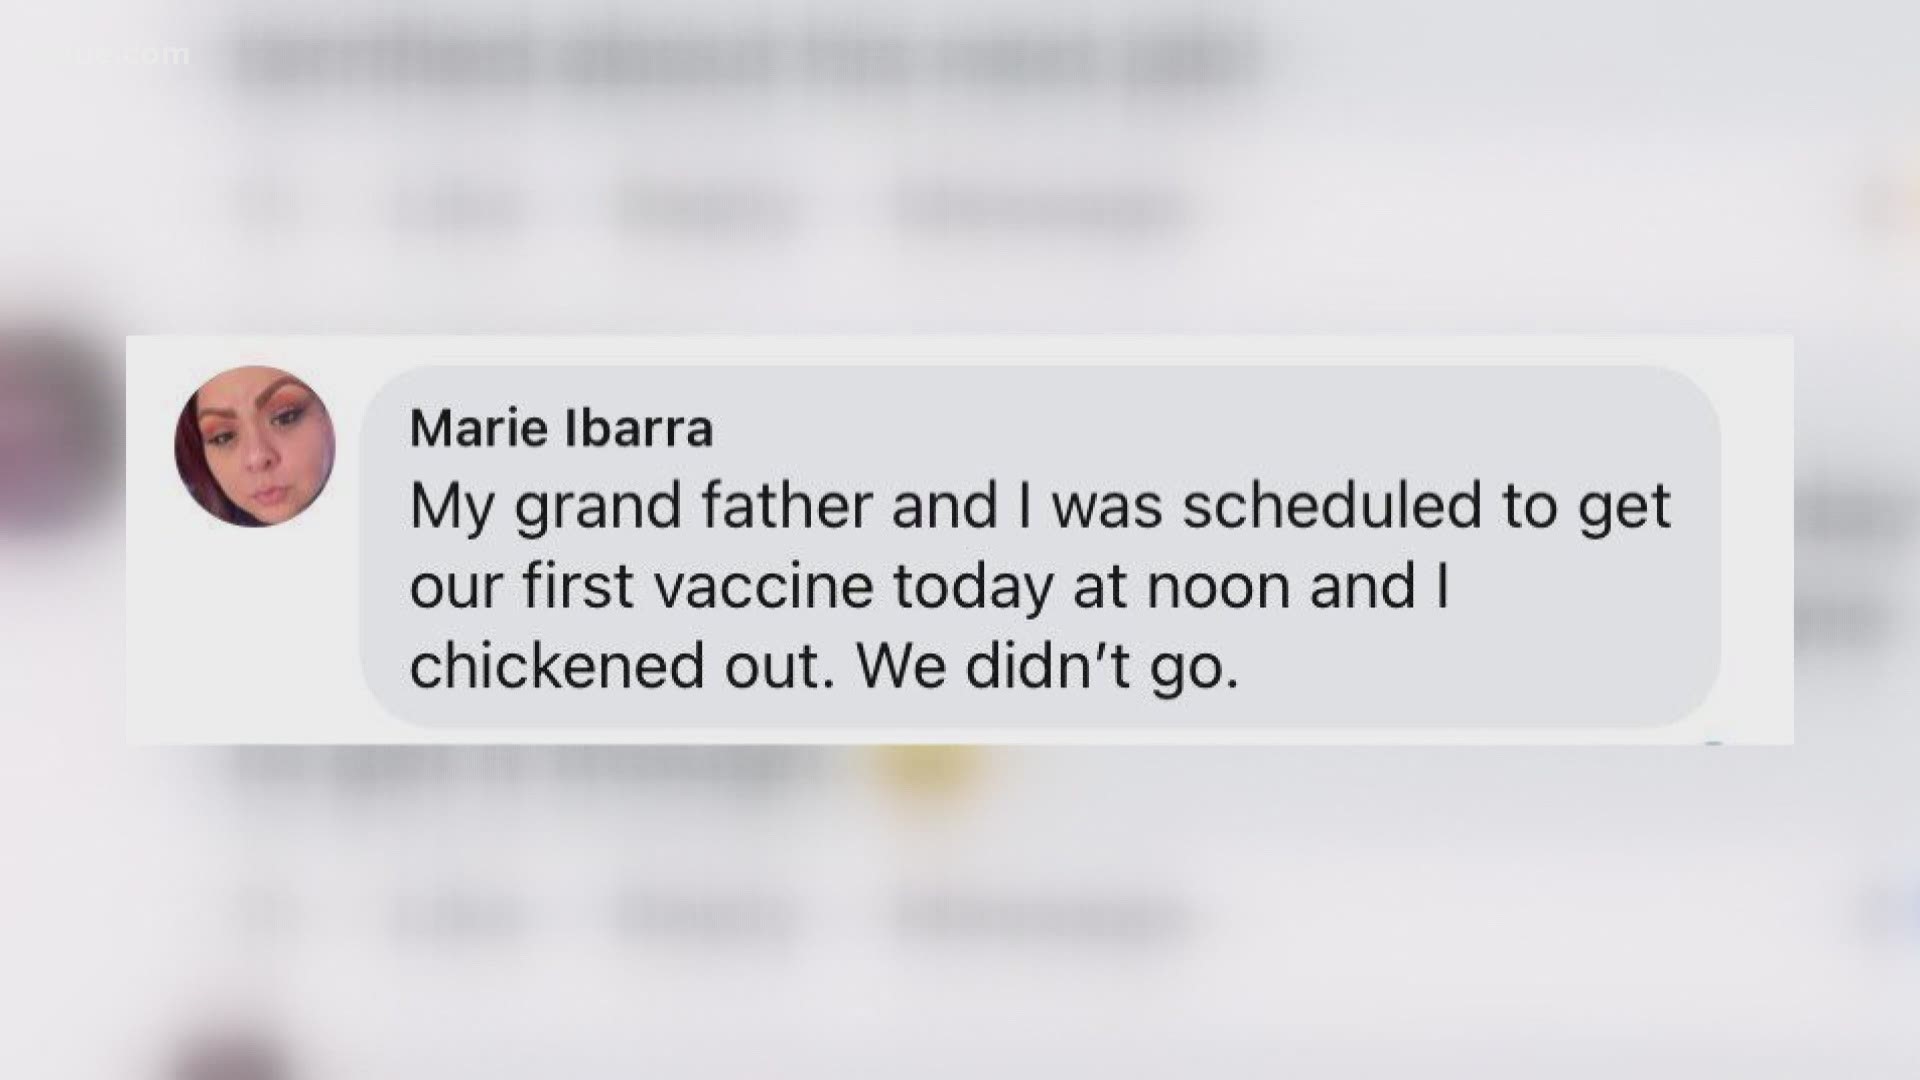 Some people aren't so eager to get the vaccine. KVUE's Hannah Rucker heard their thoughts on Facebook Live.